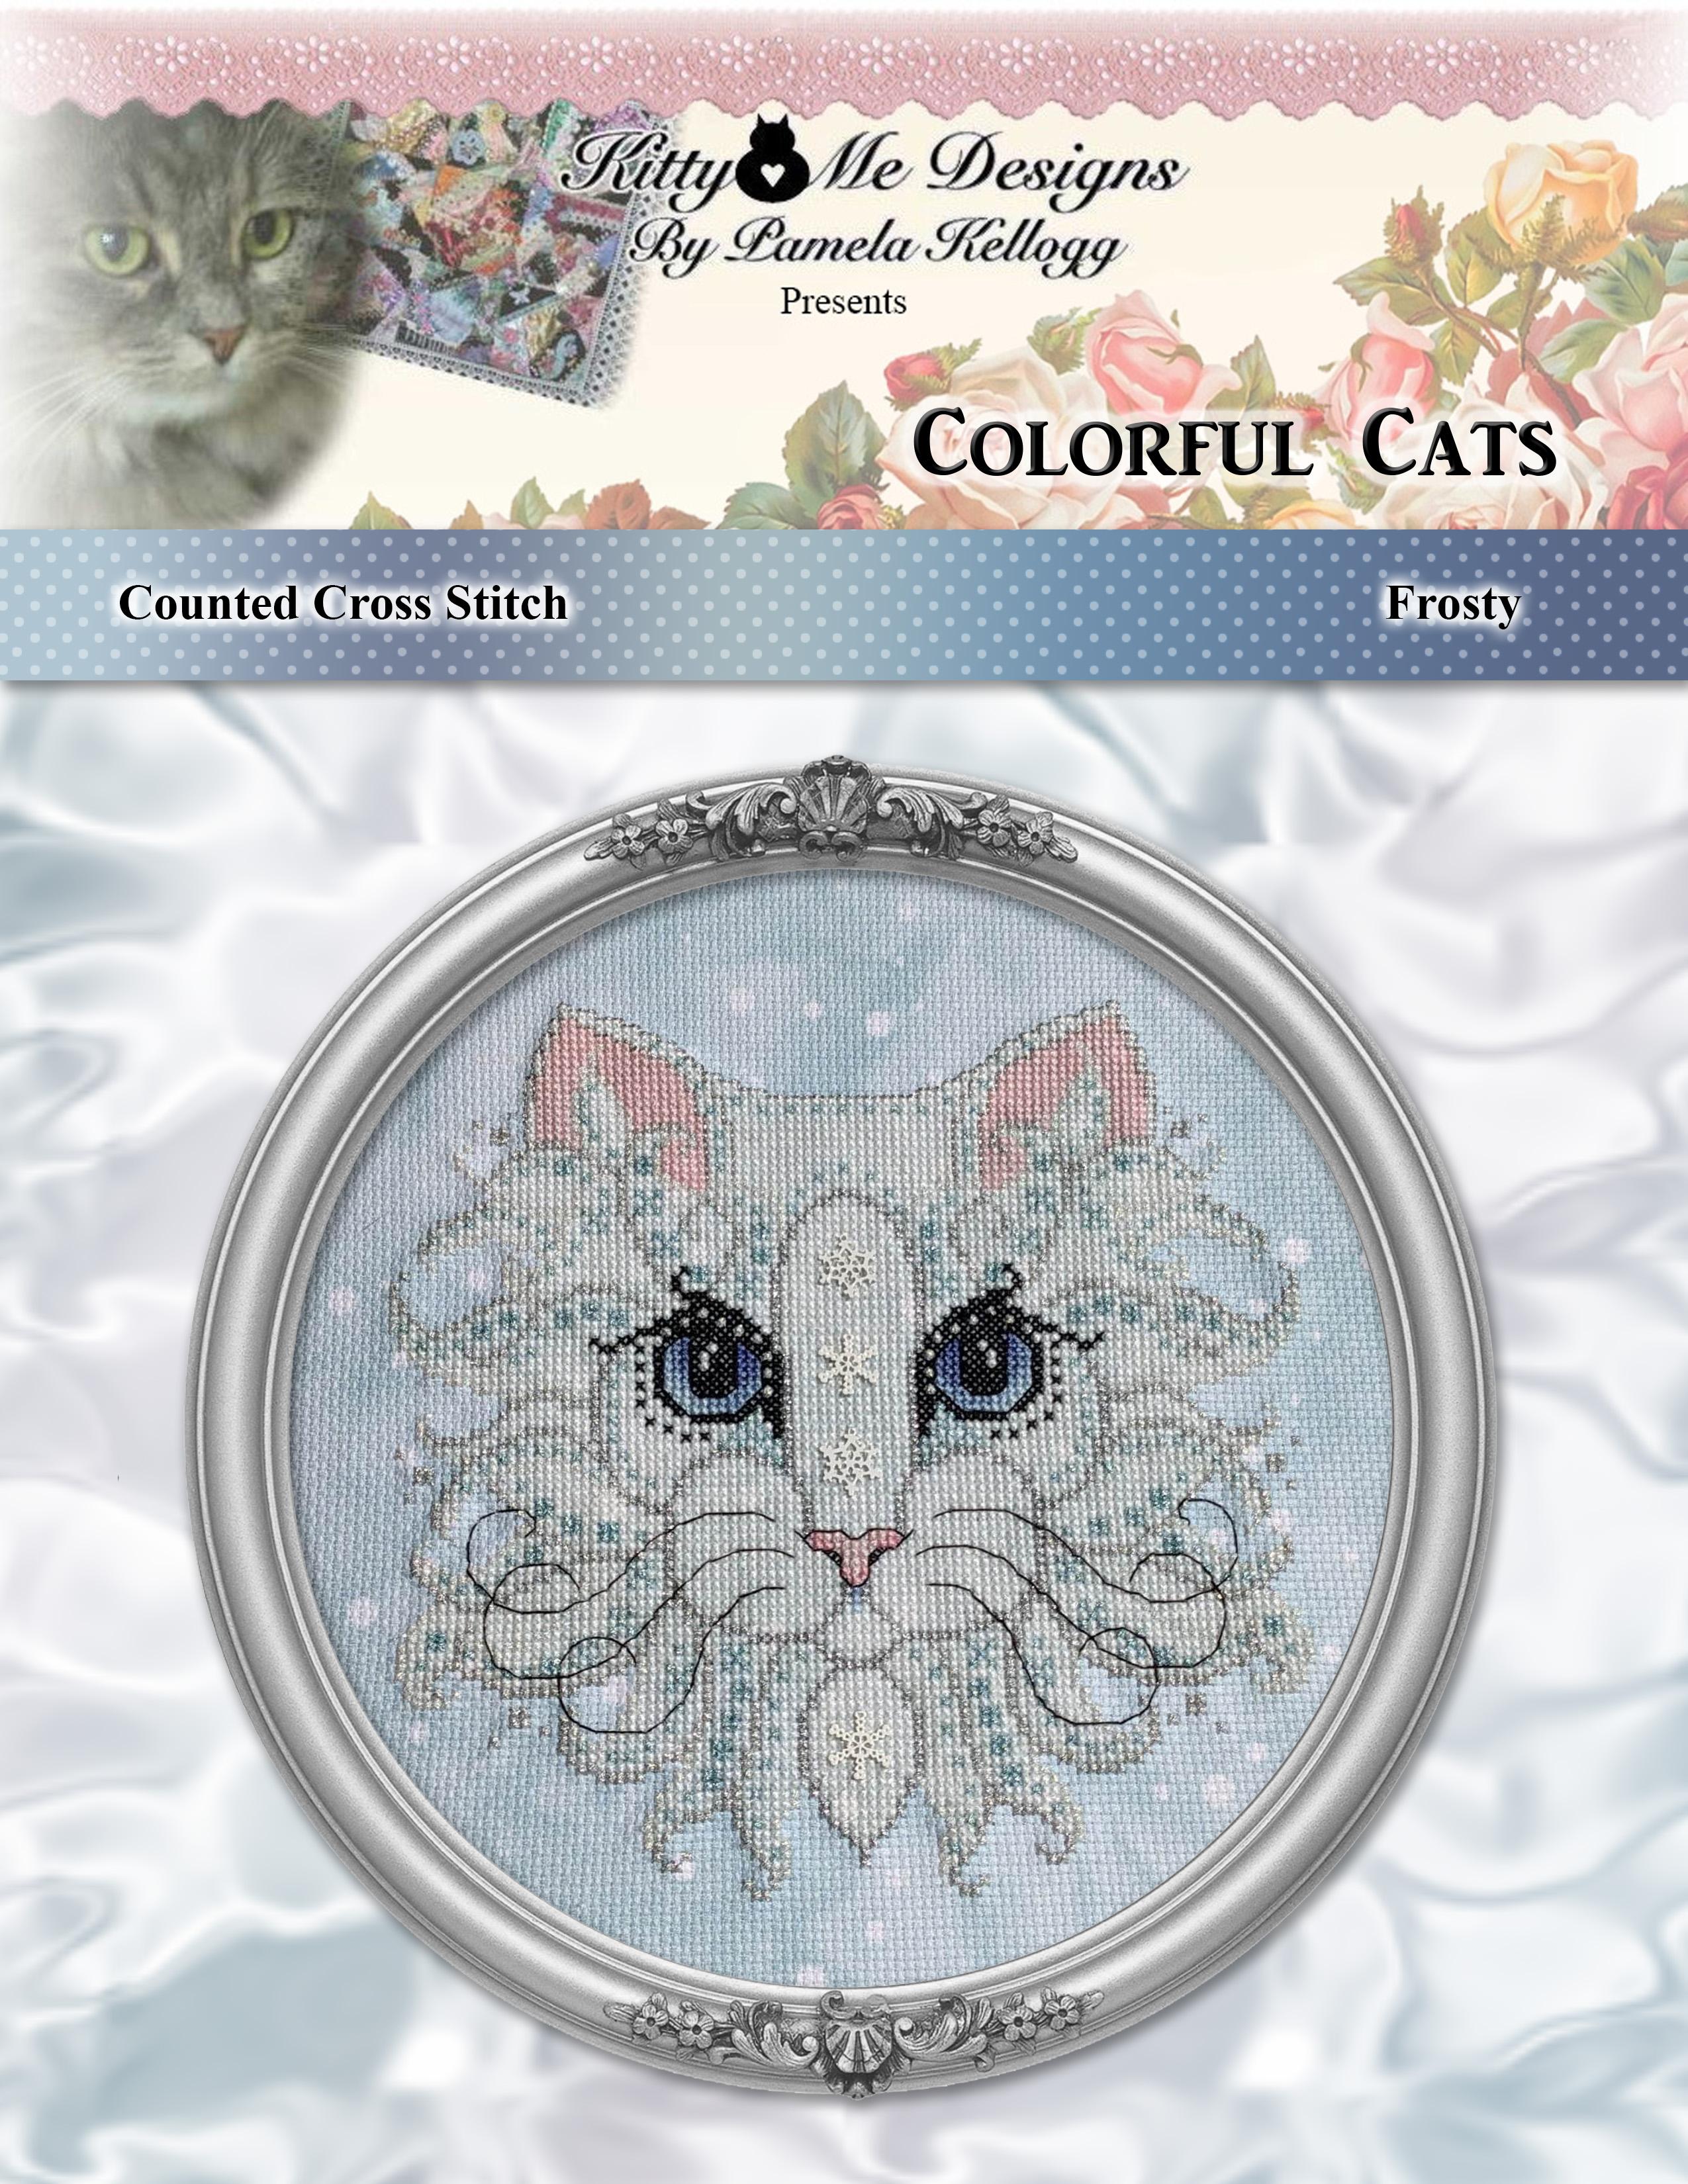 Colorful Cats: Frosty by Kitty and Me Designs